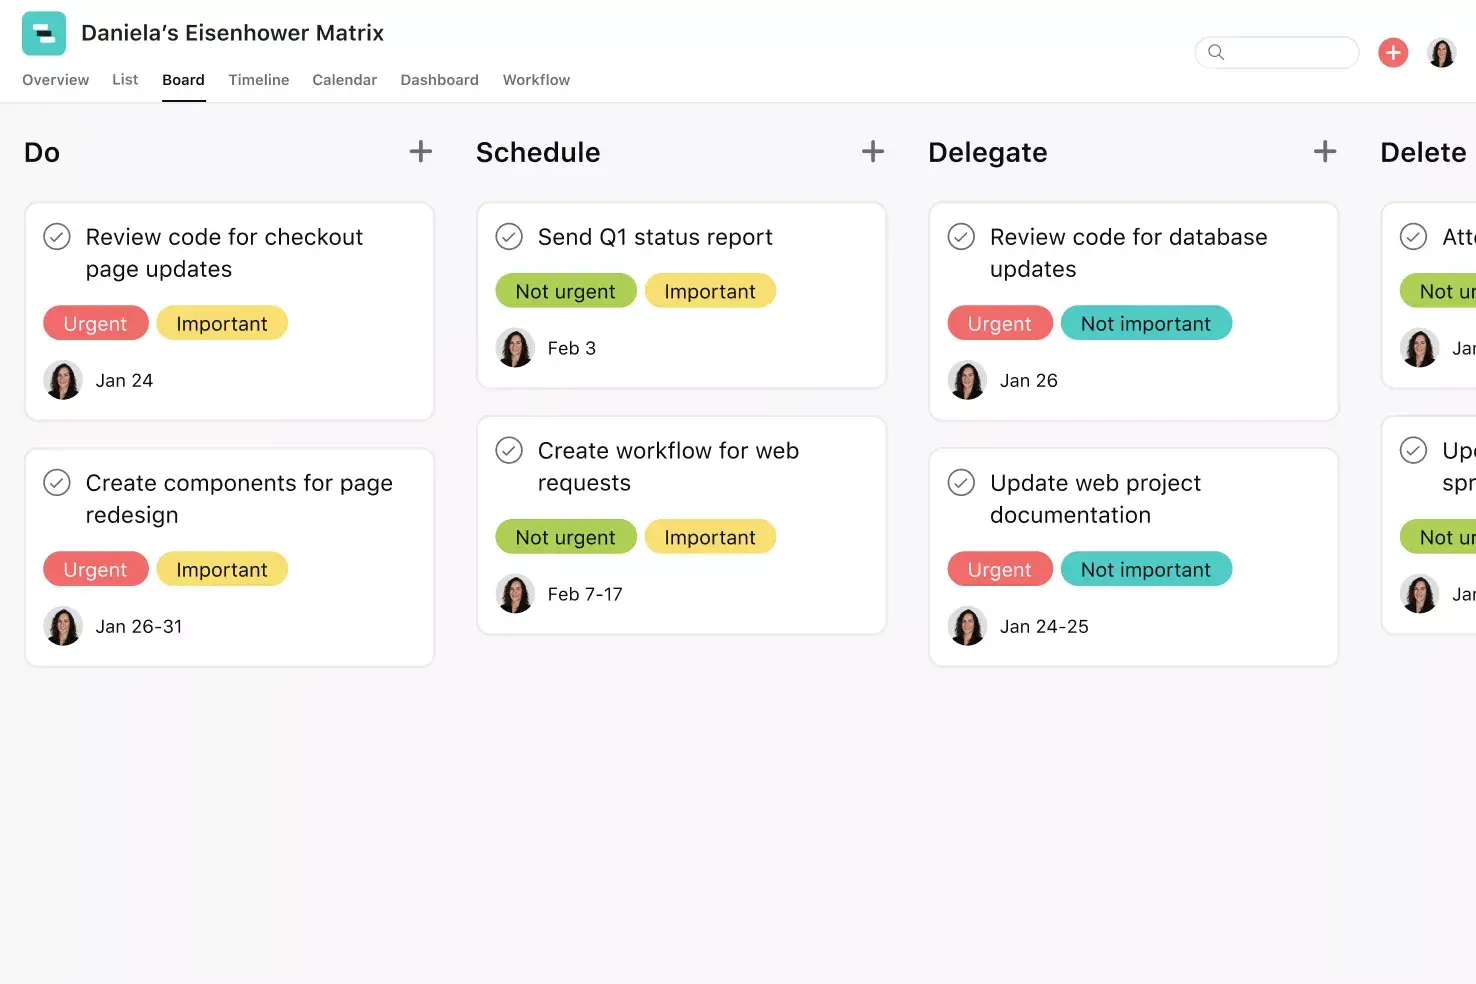 [Product ui] Actionable Eisenhower Matrix project in Asana, Kanban board style view (Boards)